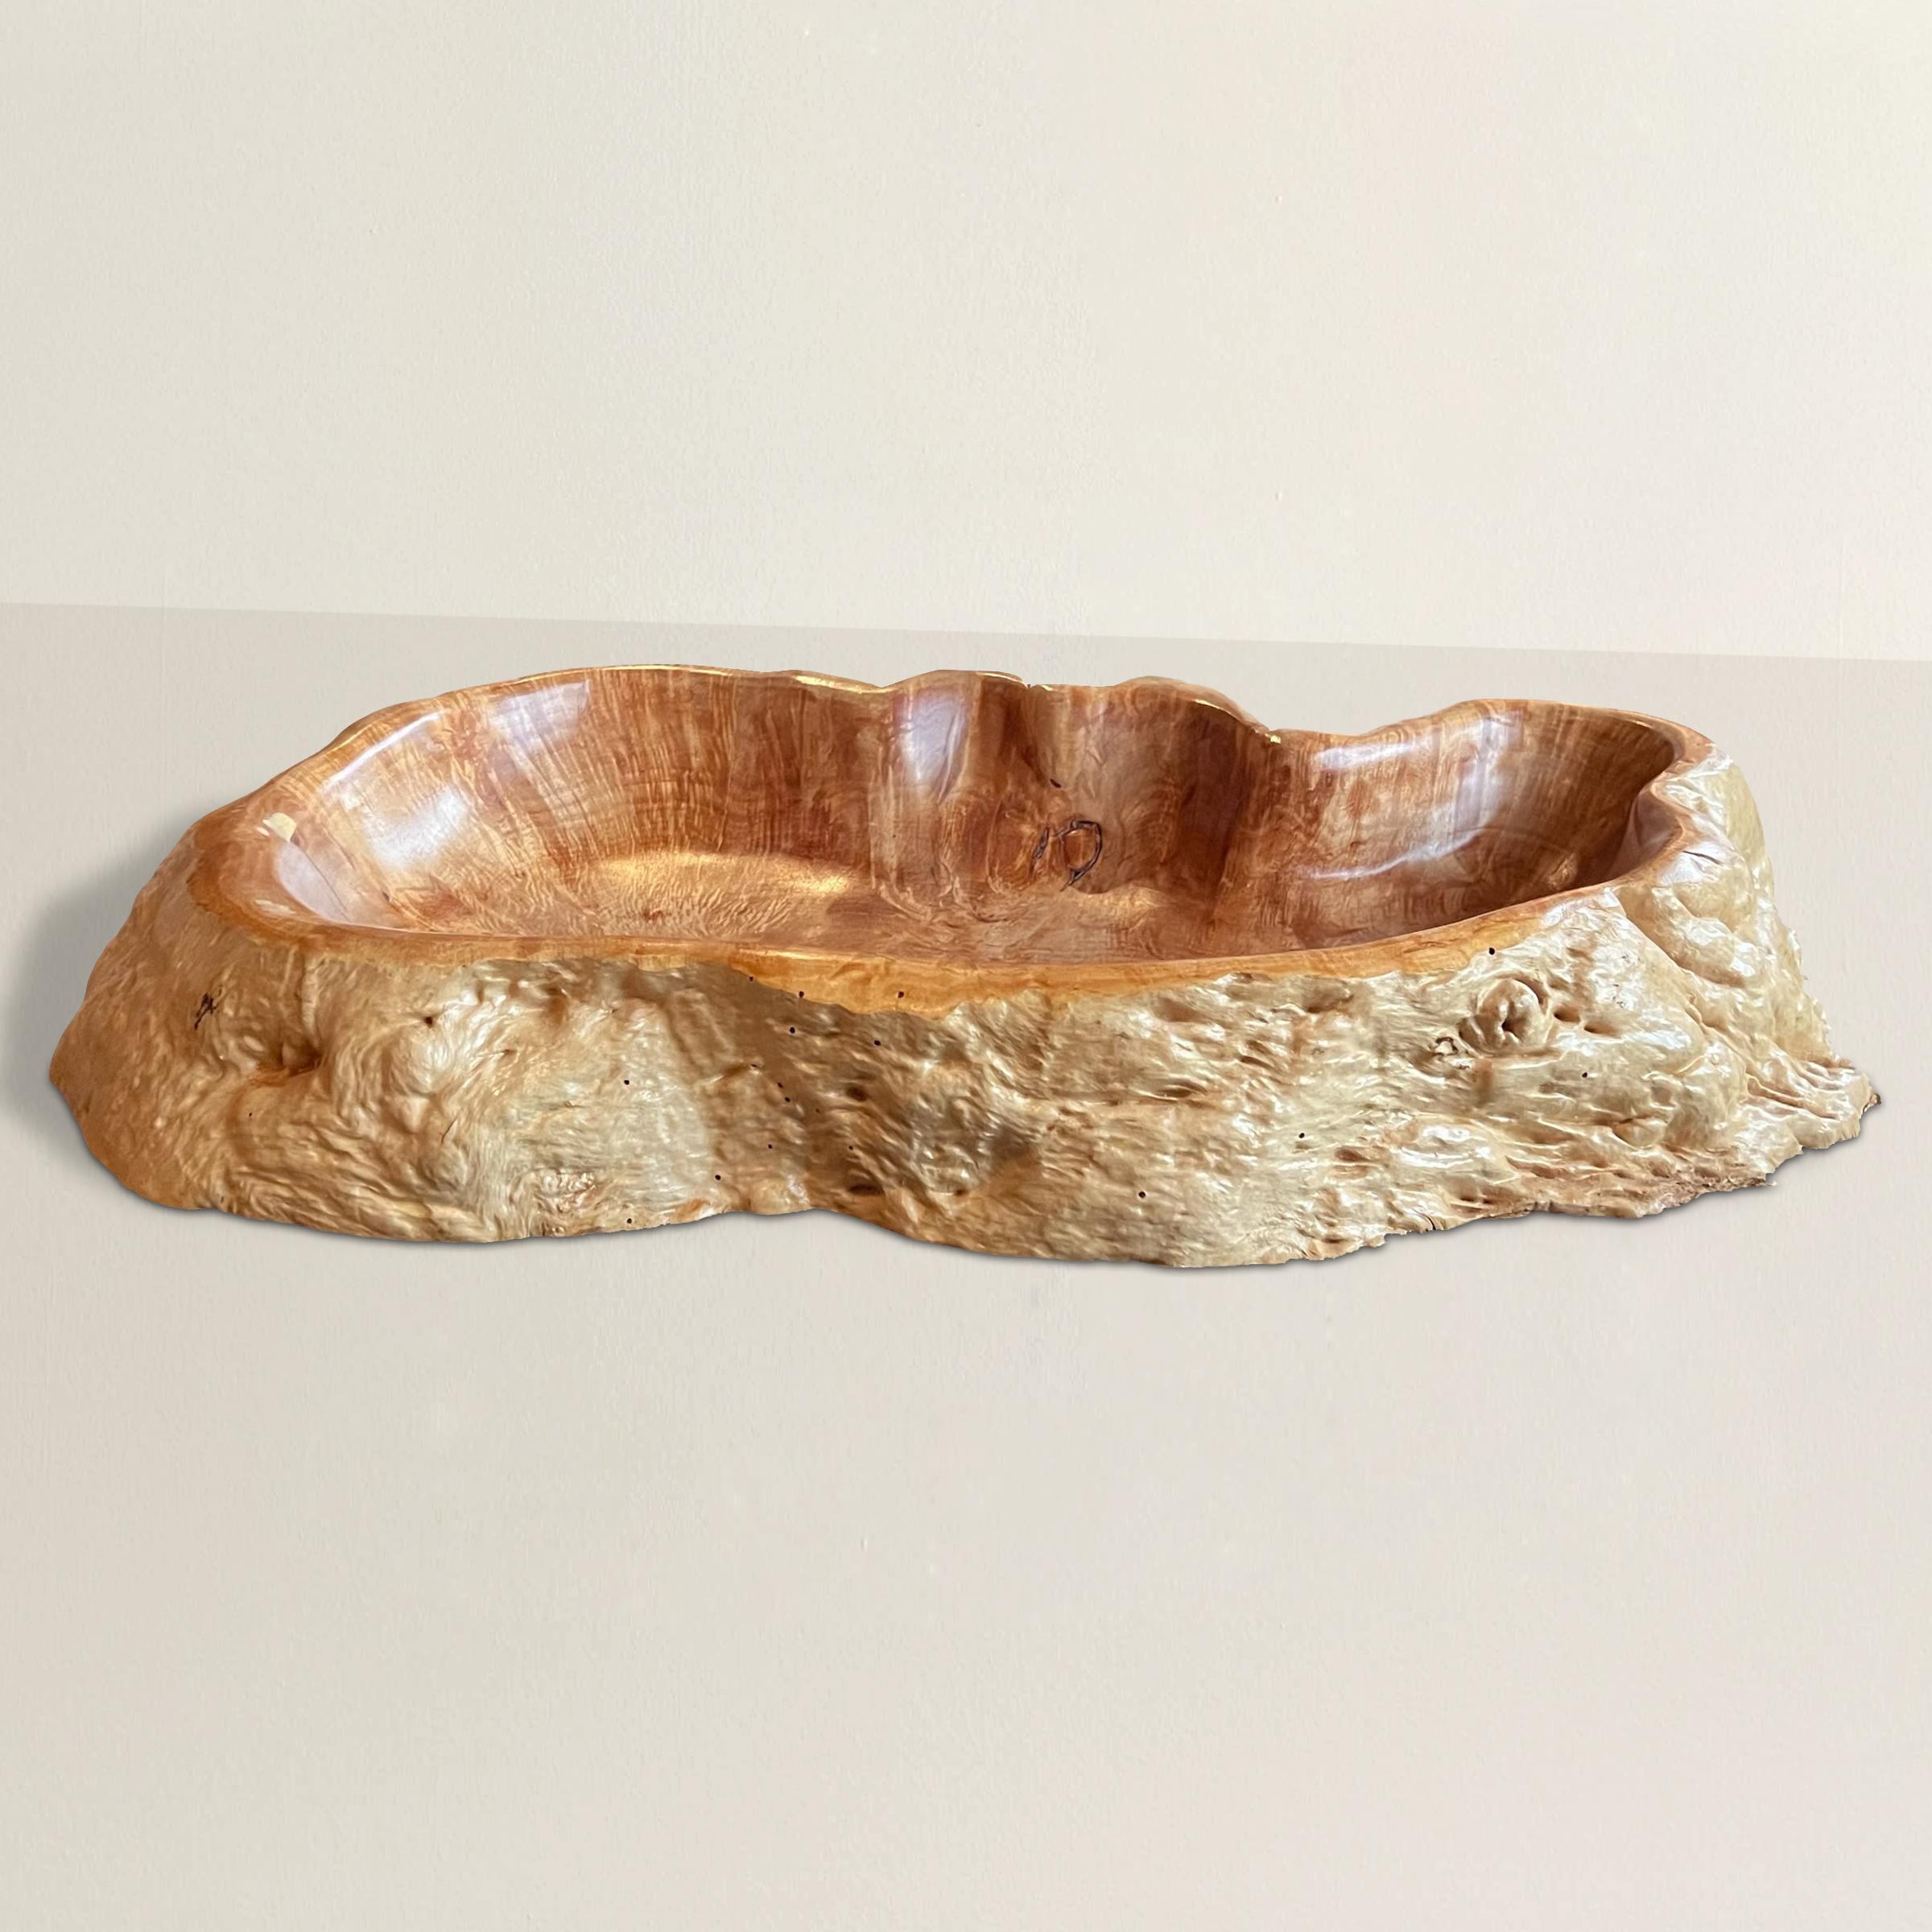 A stunning 21st century hand-carved burl wood tray of rather large size, and perfectly designed to hold your keys, sunglasses, remote controls, or any other odds and ends you have lying around the house.  